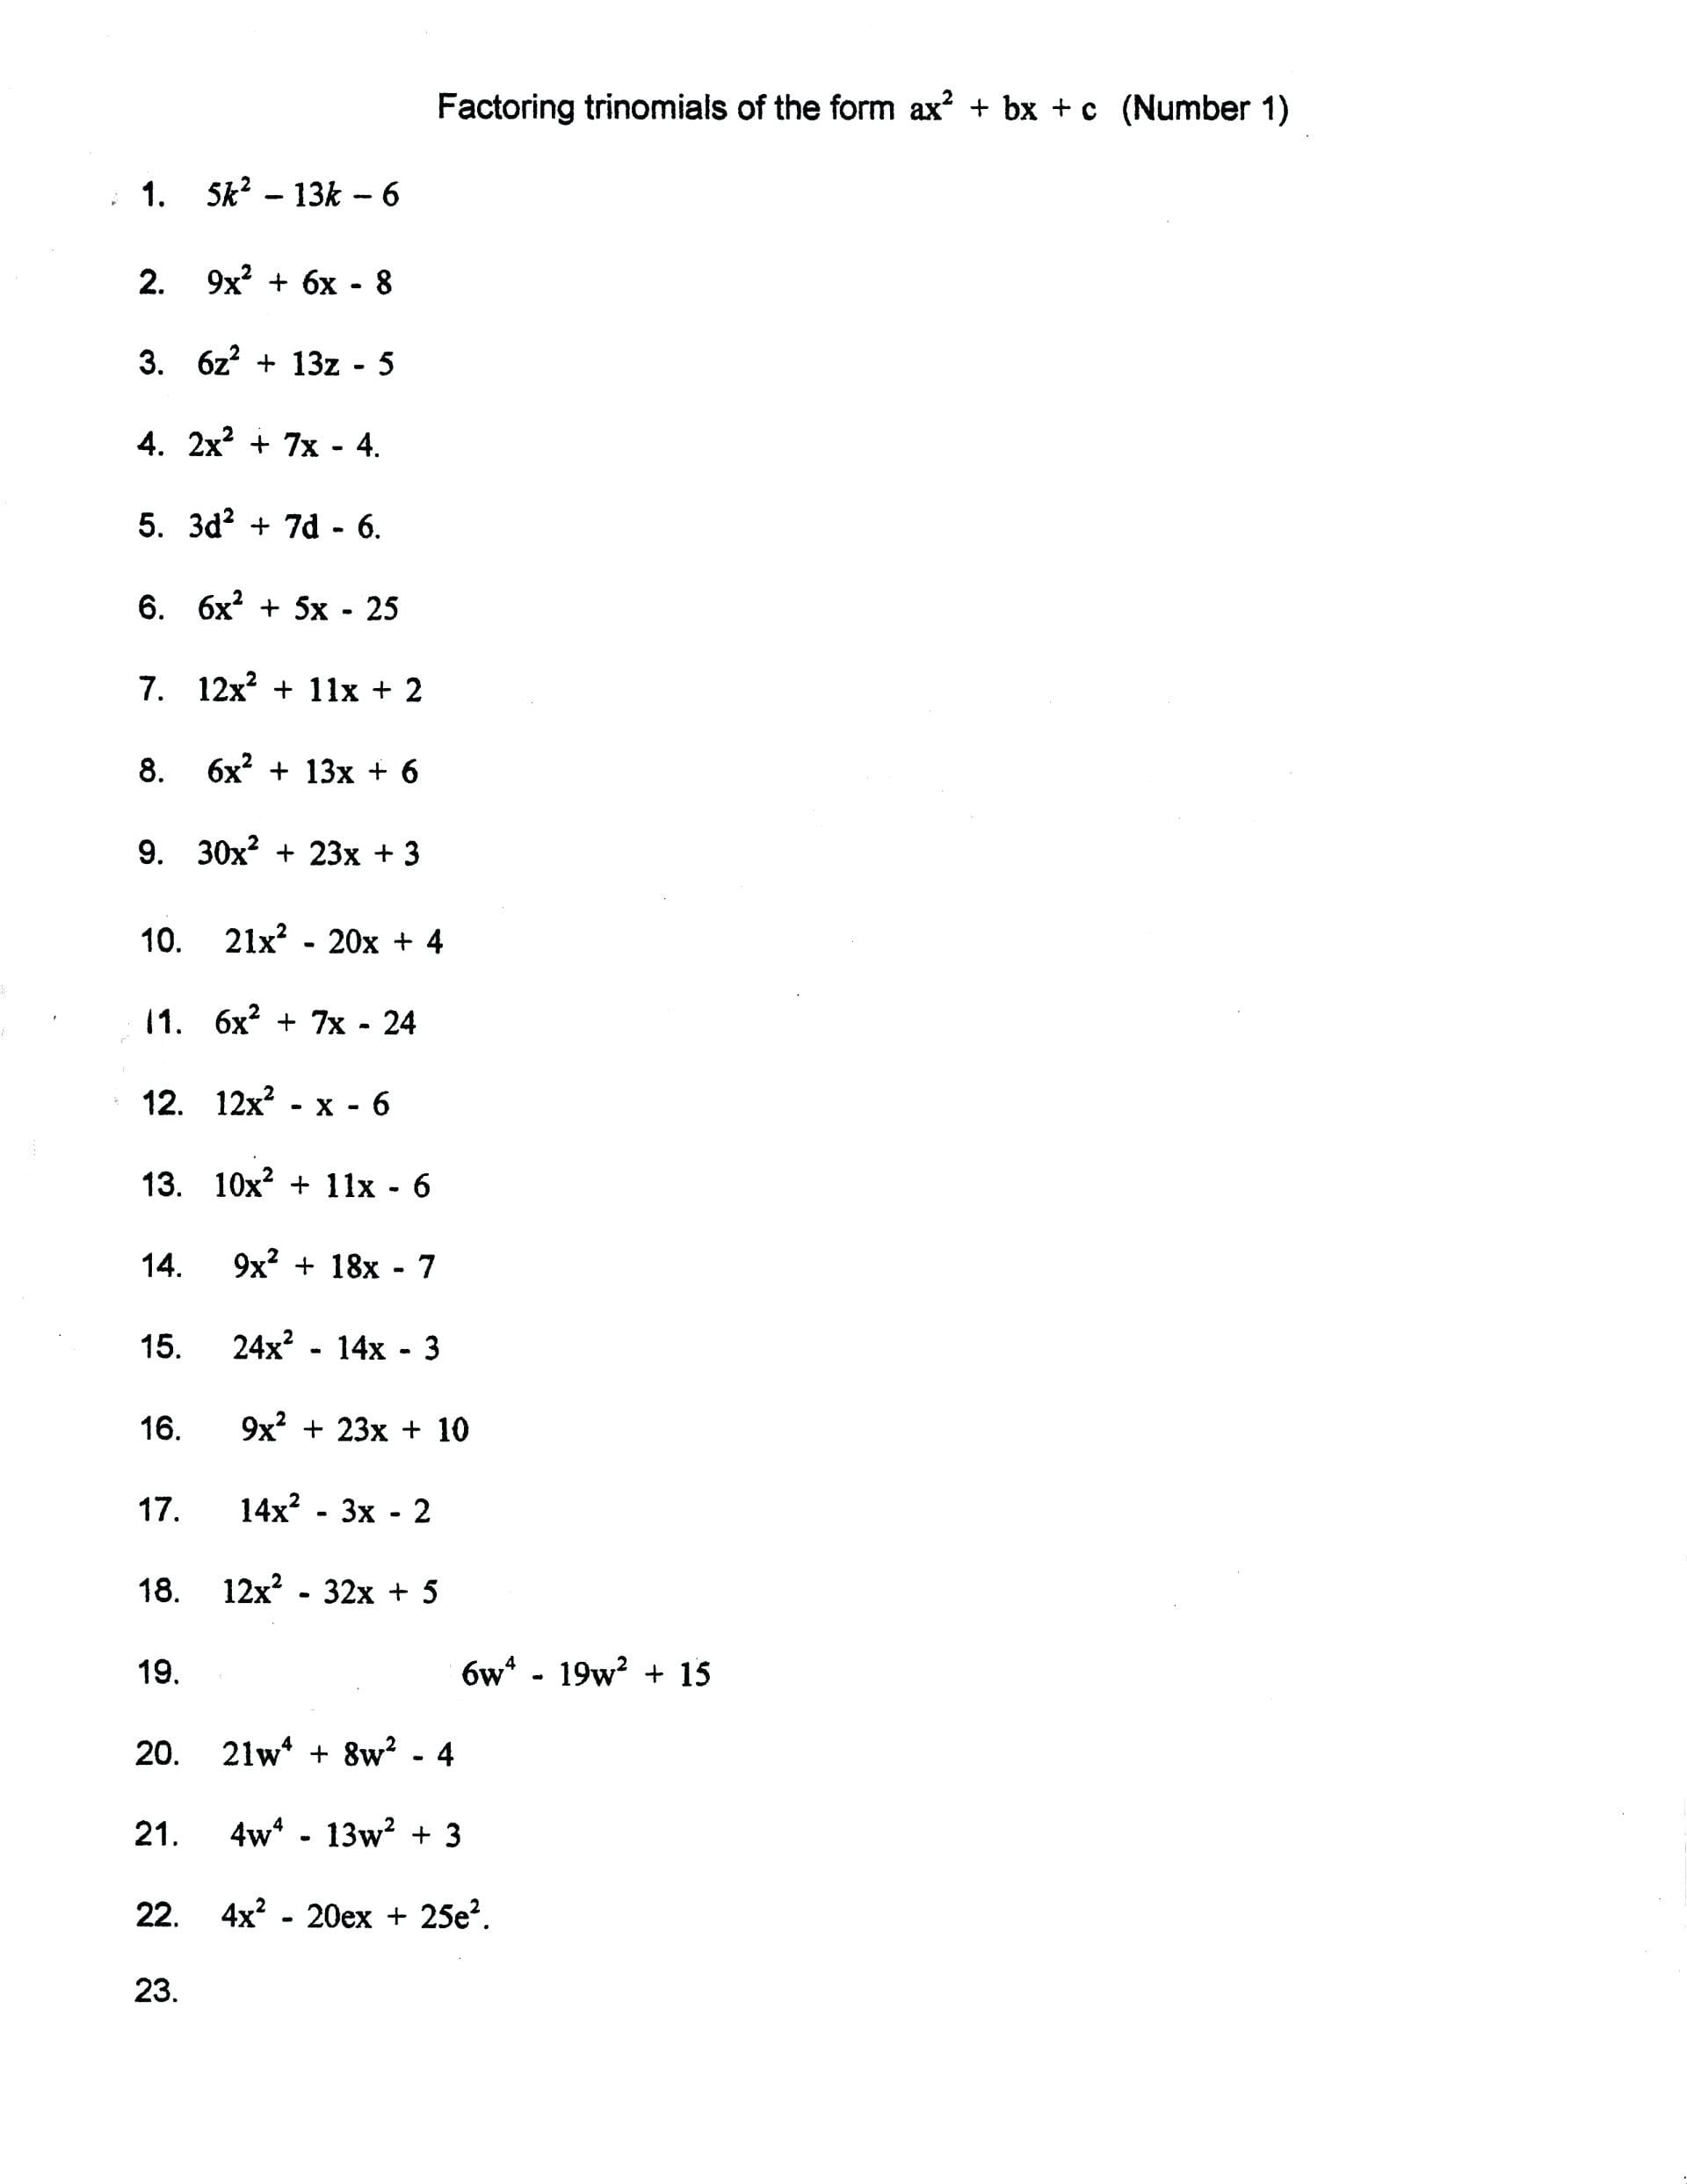 factoring-polynomials-worksheet-with-answers-algebra-2-db-excel